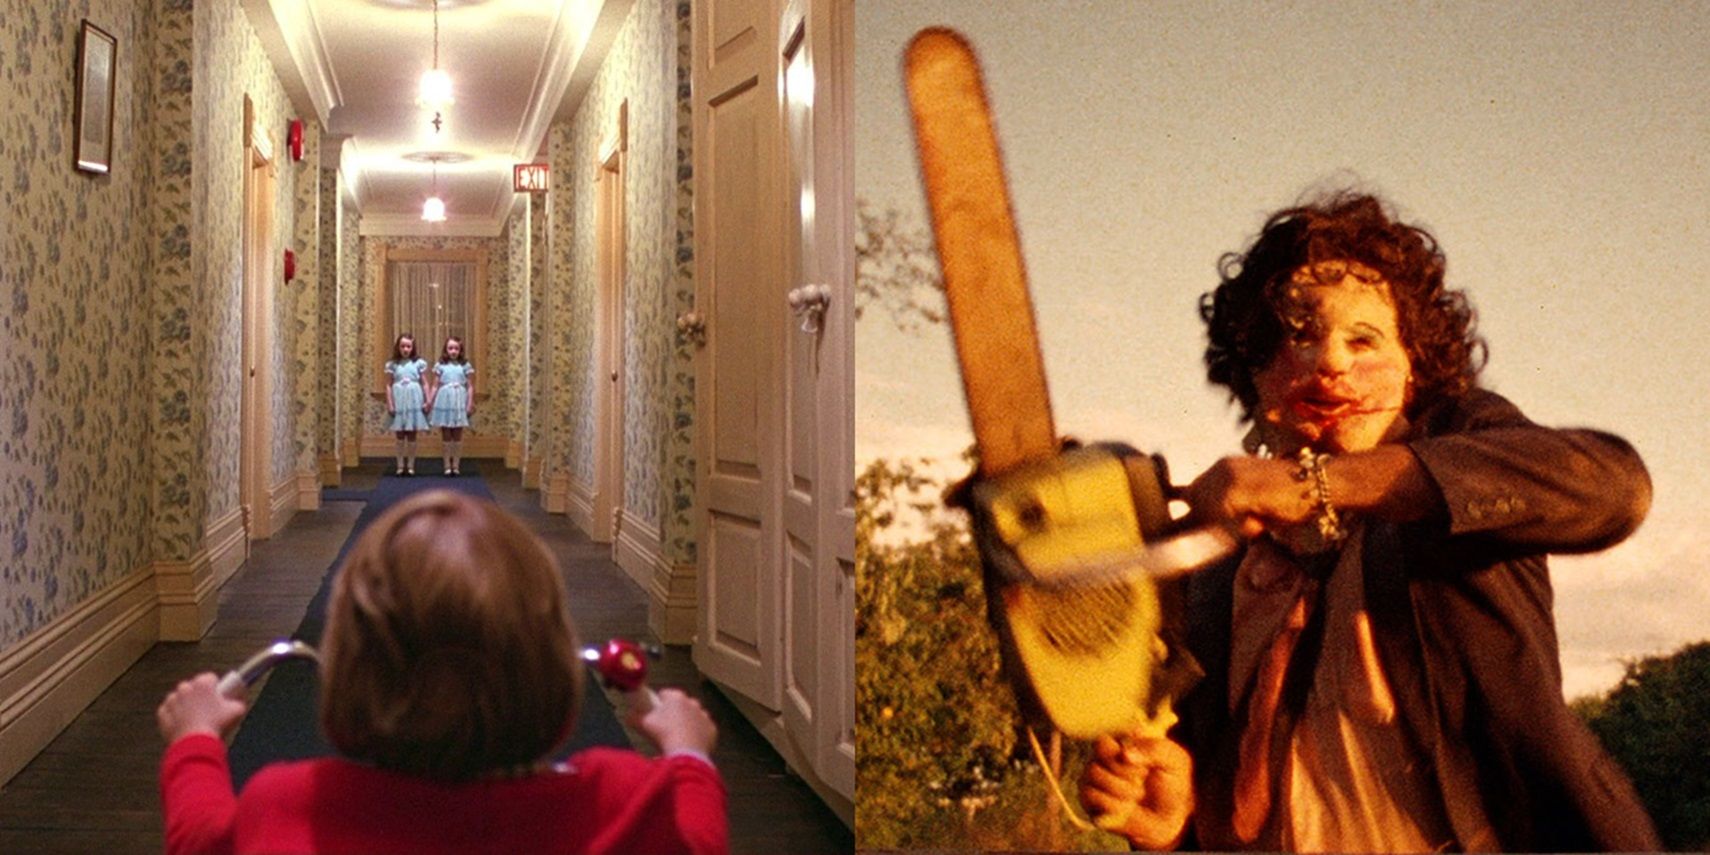 Split image of Danny in the hallway in The Shining and Leatherface in The Texas Chain Saw Massacre.